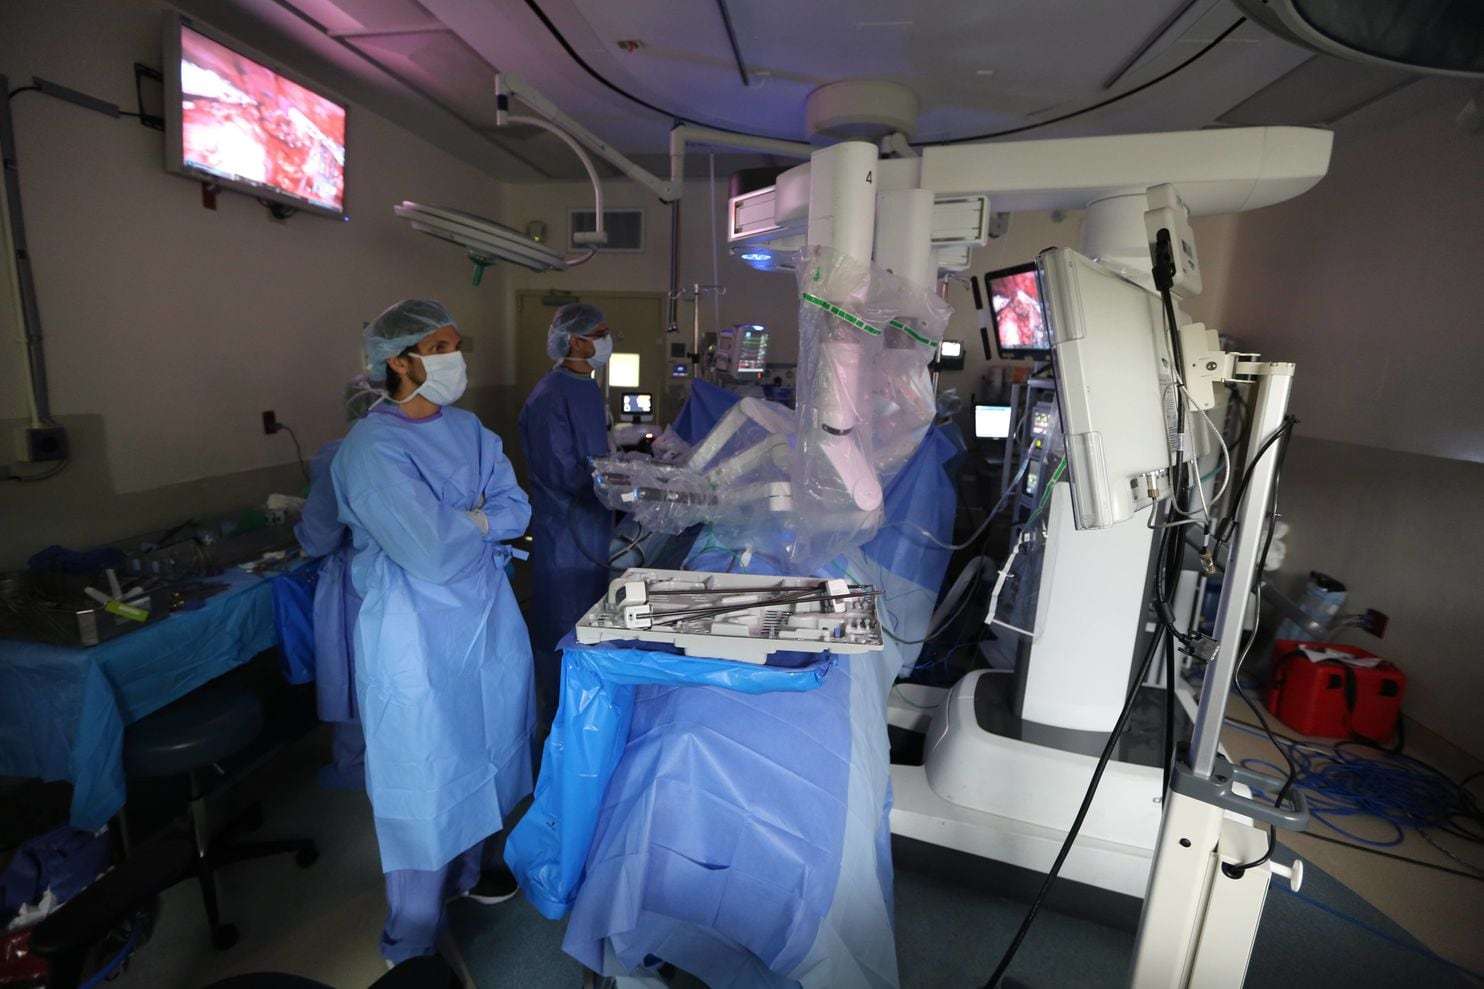 Robotic surgery is no better than traditional surgery ...